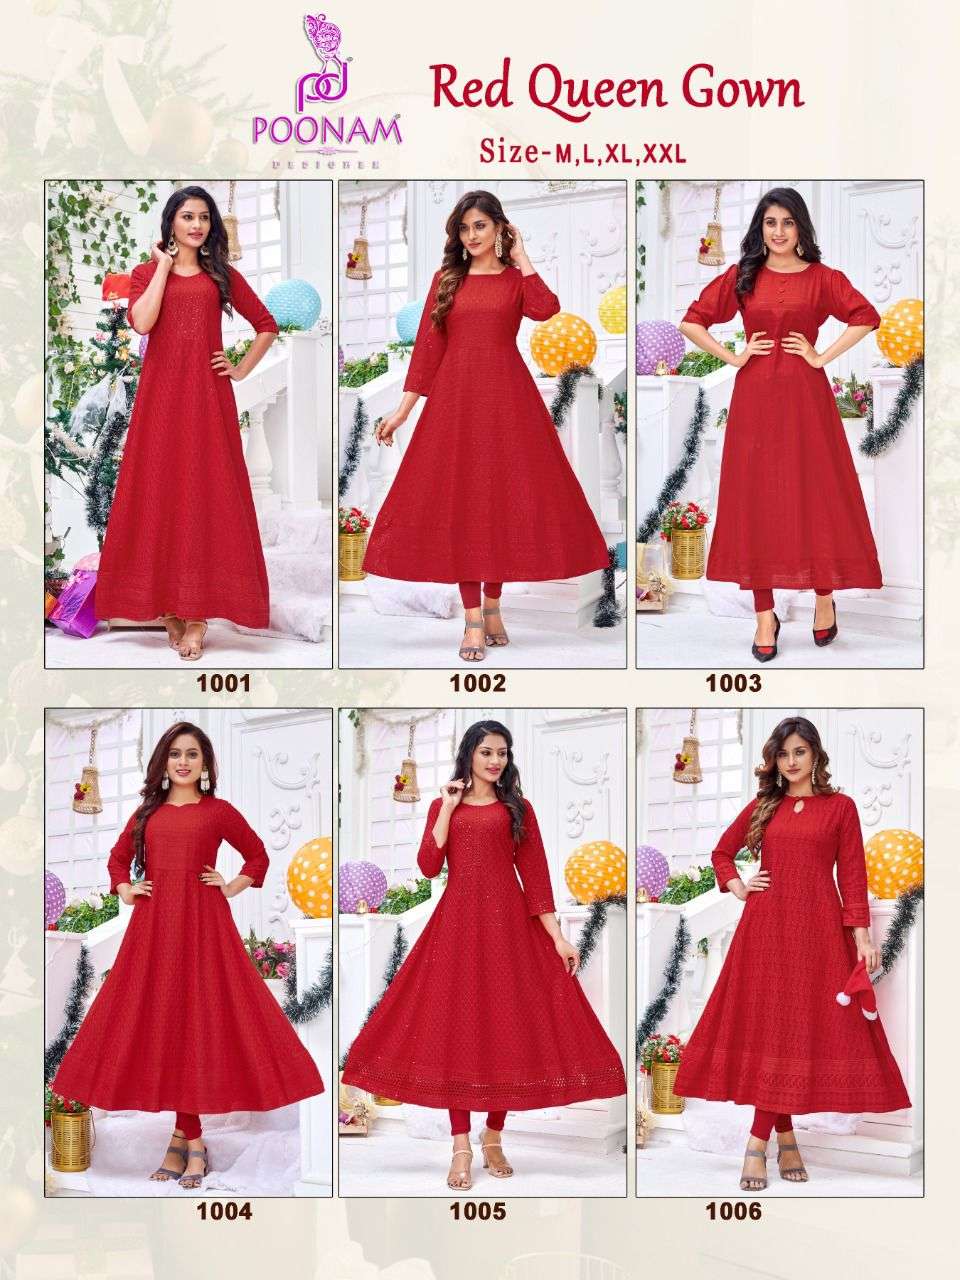 POONAM DESIGNER RED QUEEN GOWN STYLE KURTIS CHRISTMAS CATALOGUE